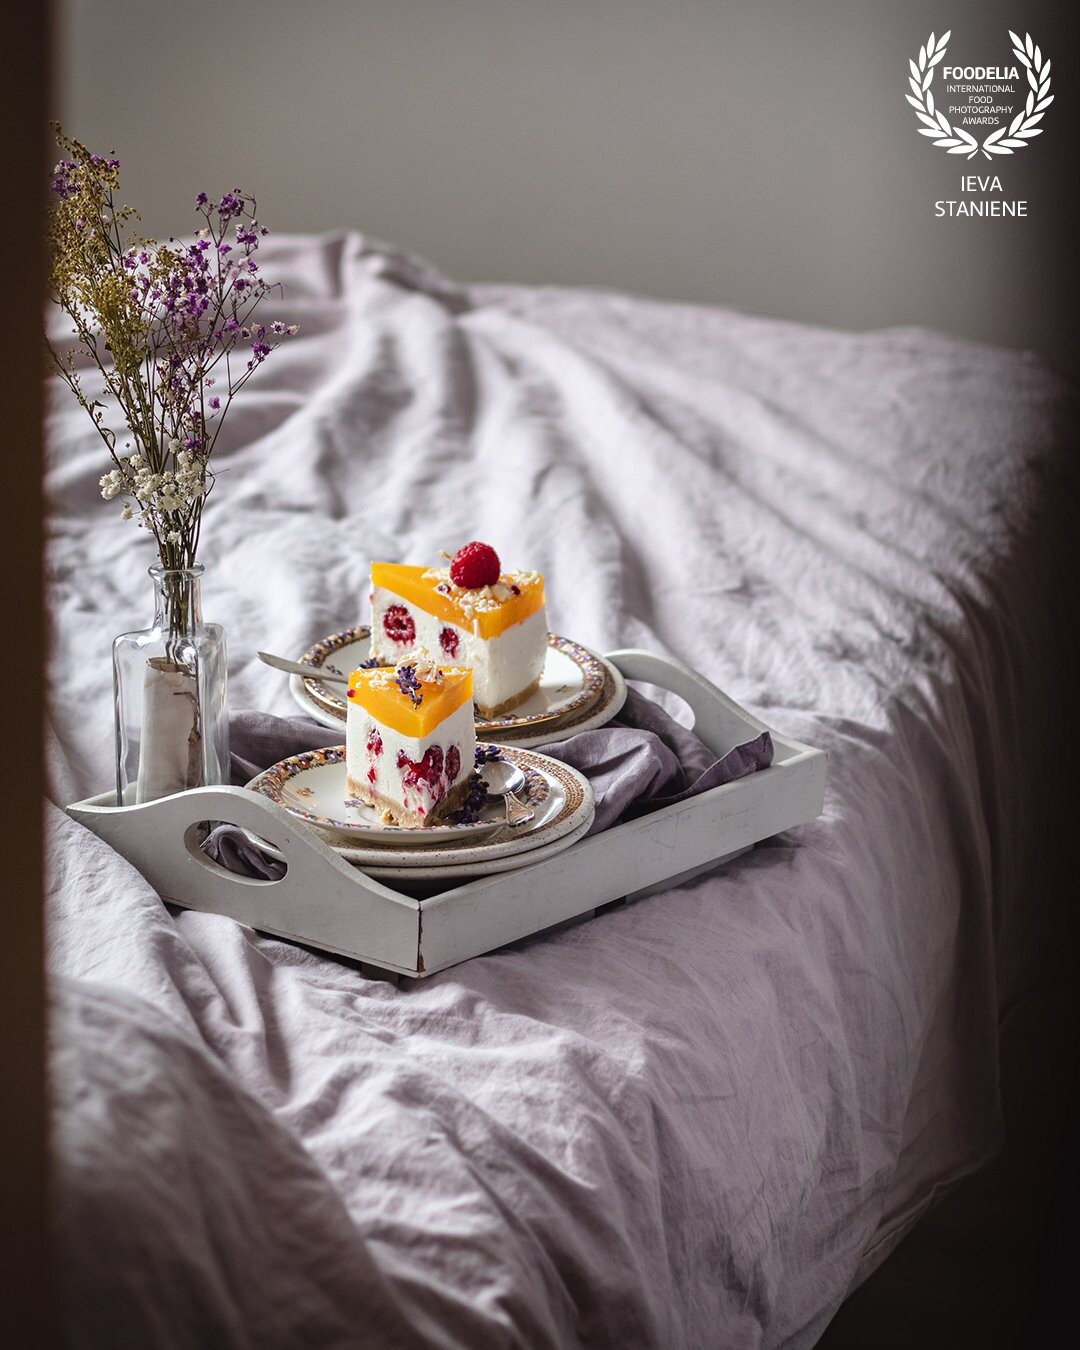 Who wouldn’t like to spend a lazy weekend morning or afternoon with a piece of tasty curd, white chocolate, raspberry and mandarin cake? <br />
<br />
I captured a tiny bit of door to frame and narrow the scene and make the subject pop.